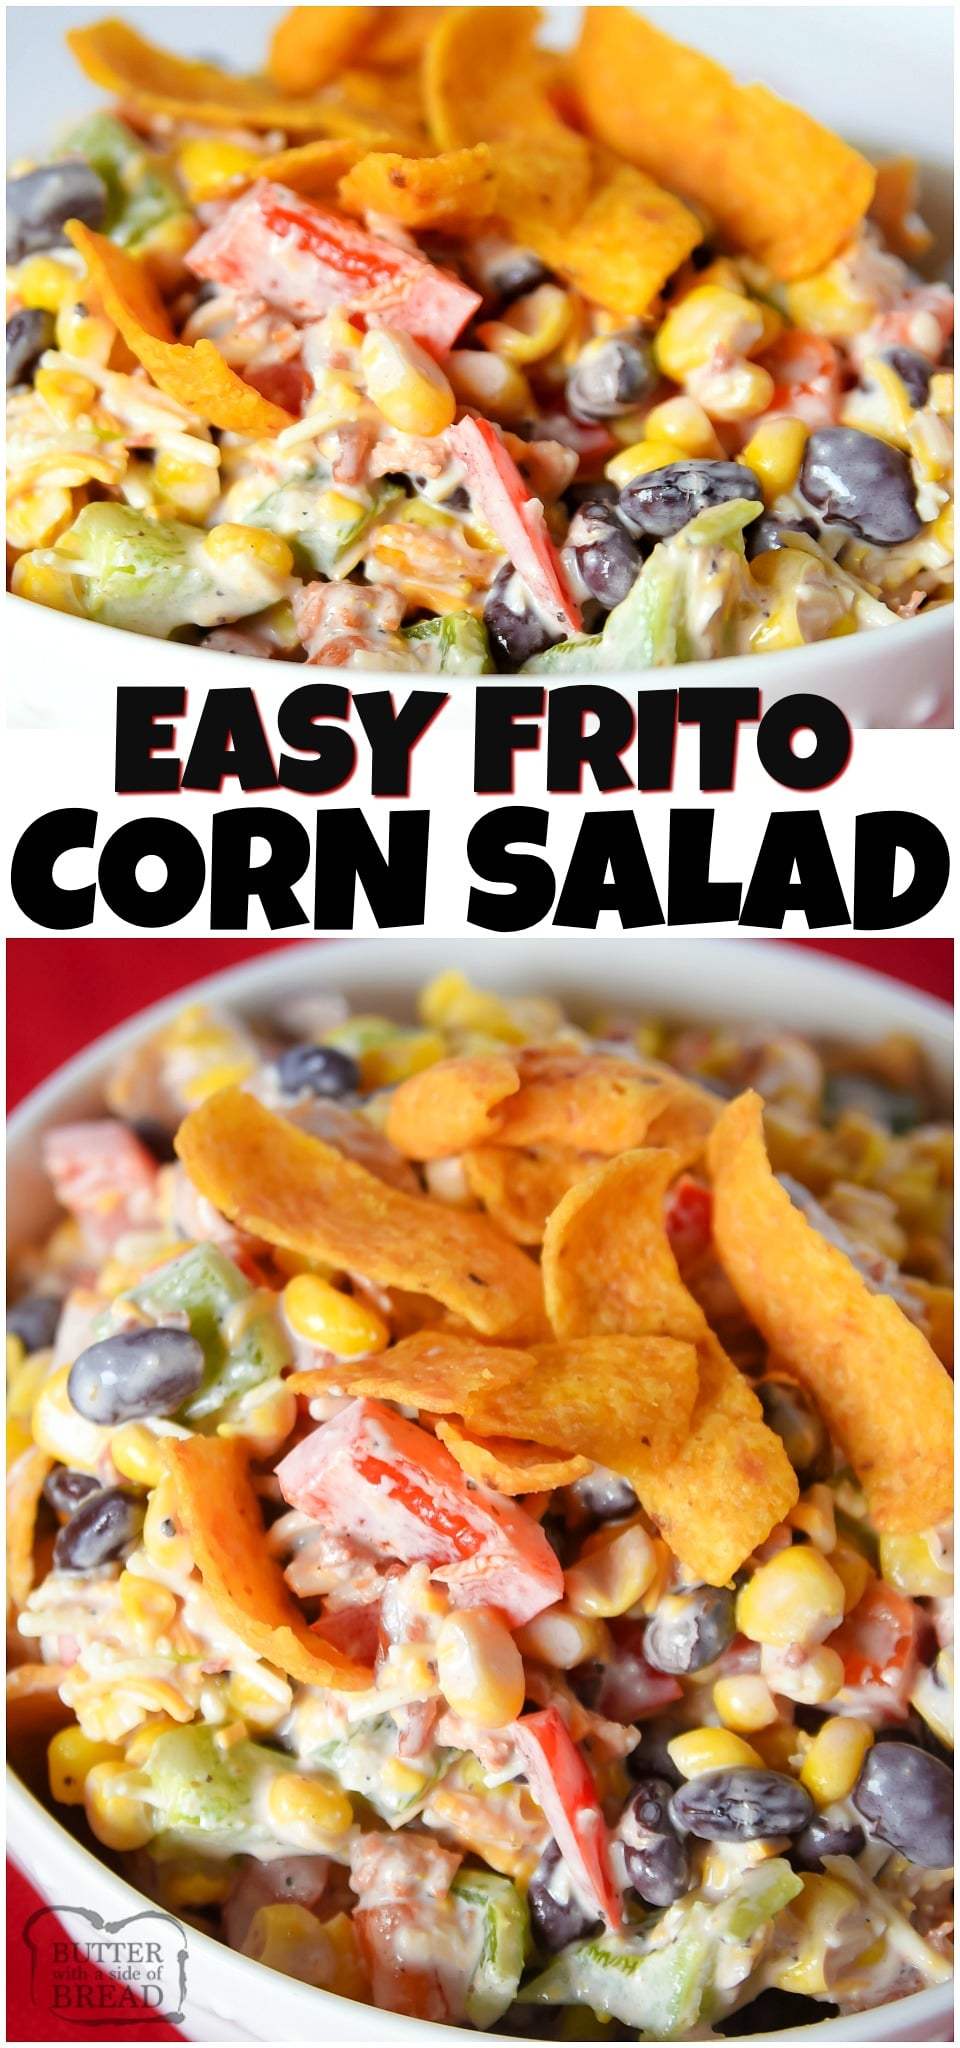 Frito Corn Salad is a simple & flavorful summer salad perfect for any potluck or BBQ. It is packed full of fresh vegetables, cheese, bacon & crunchy Frito chips that are hard to resist! #salad #summer #Fritos #glutenfree #bacon #cheese #recipe from BUTTER WITH A SIDE OF BREAD